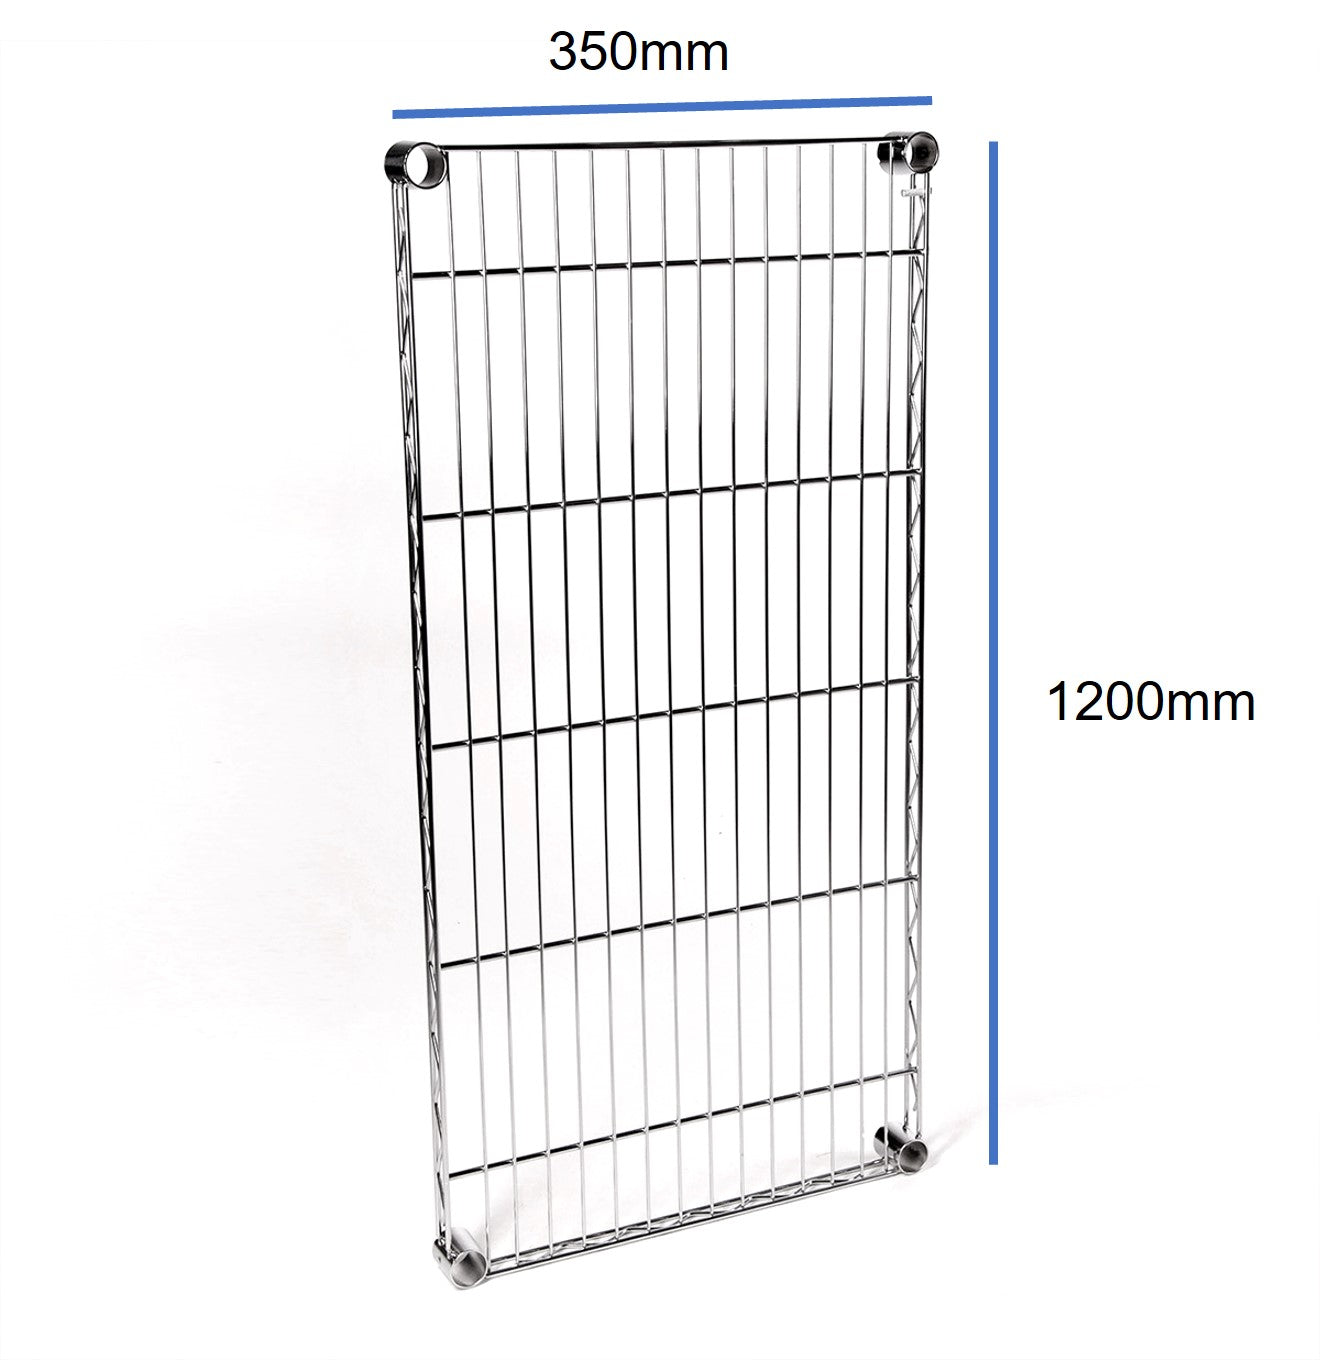 Sets with 1500mm x 350mm Shelves